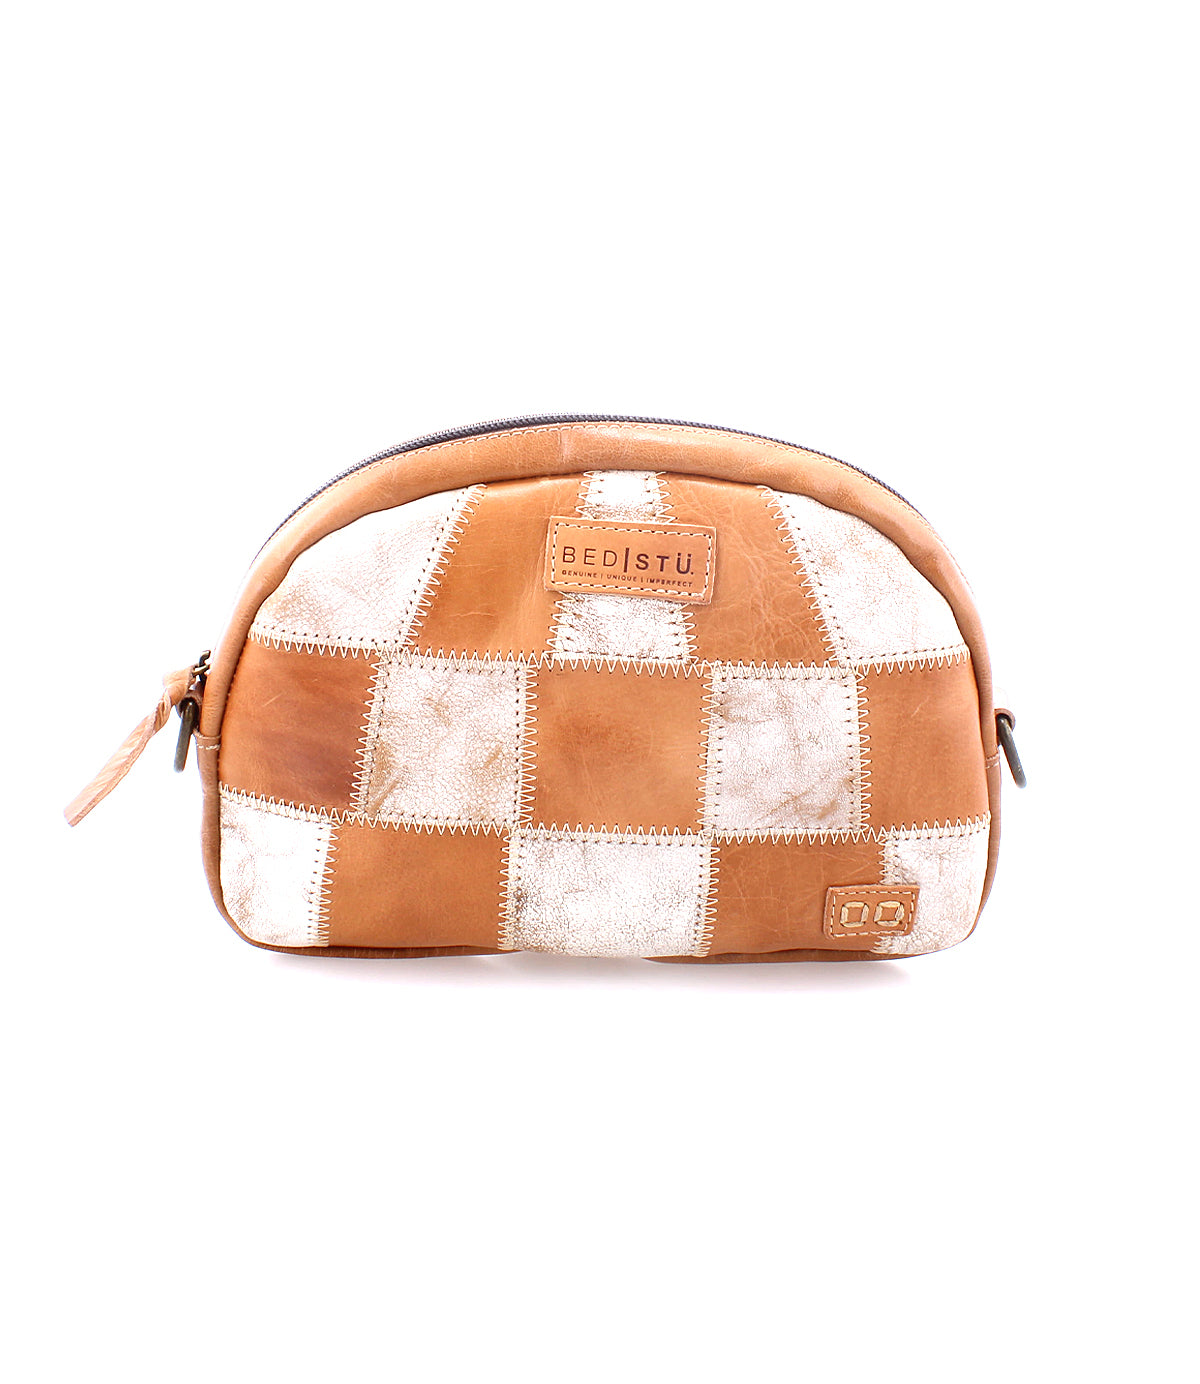 Brown and white leather patchwork sling bag with a zipper, branded "Abundance by Bed Stu" on a central patch, isolated on a white background.